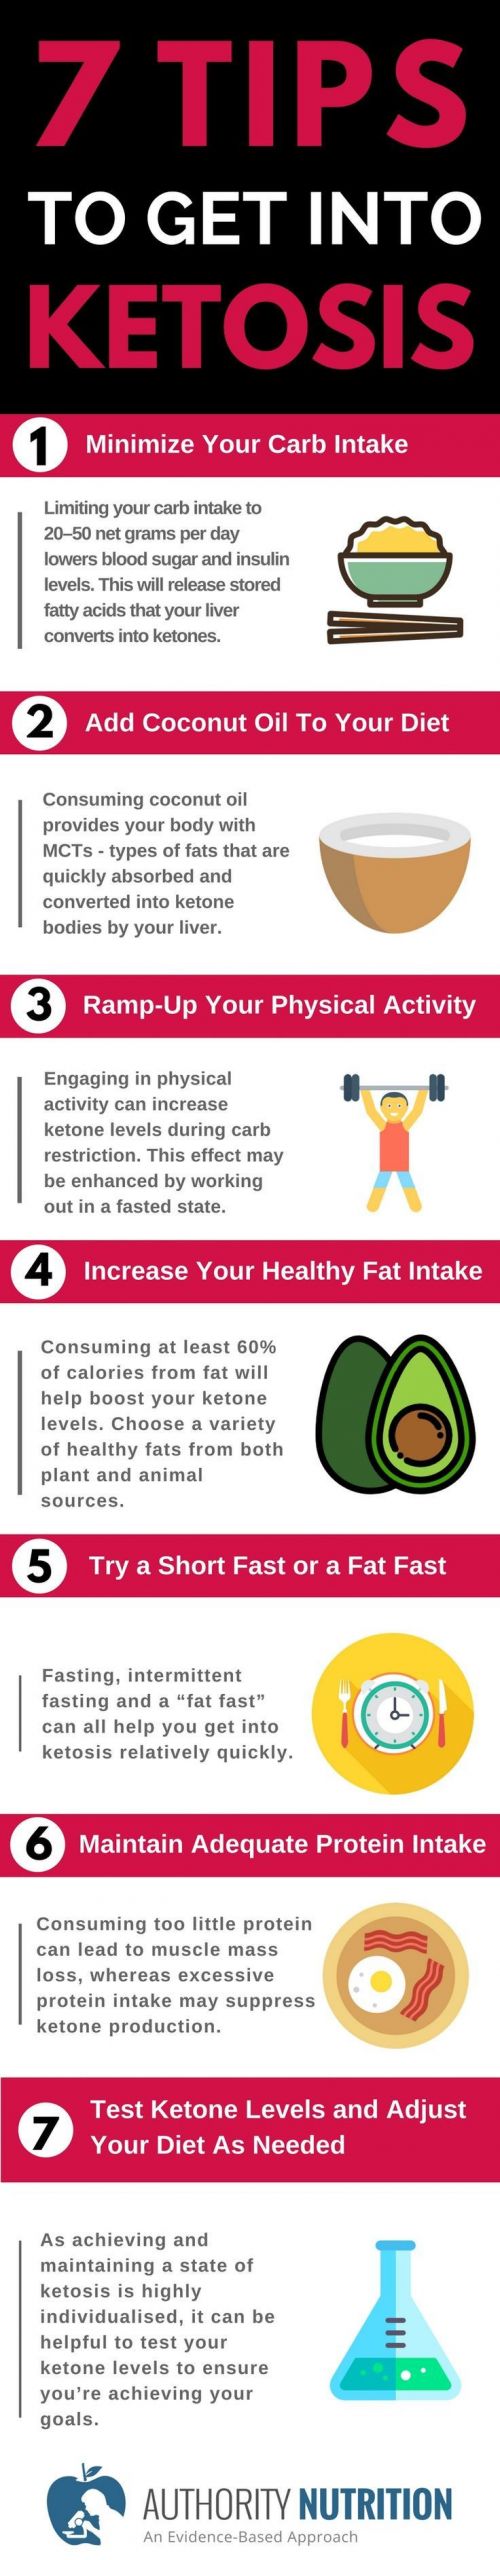 Keto Diet Tips
 Ketogenic ts have many powerful health benefits but